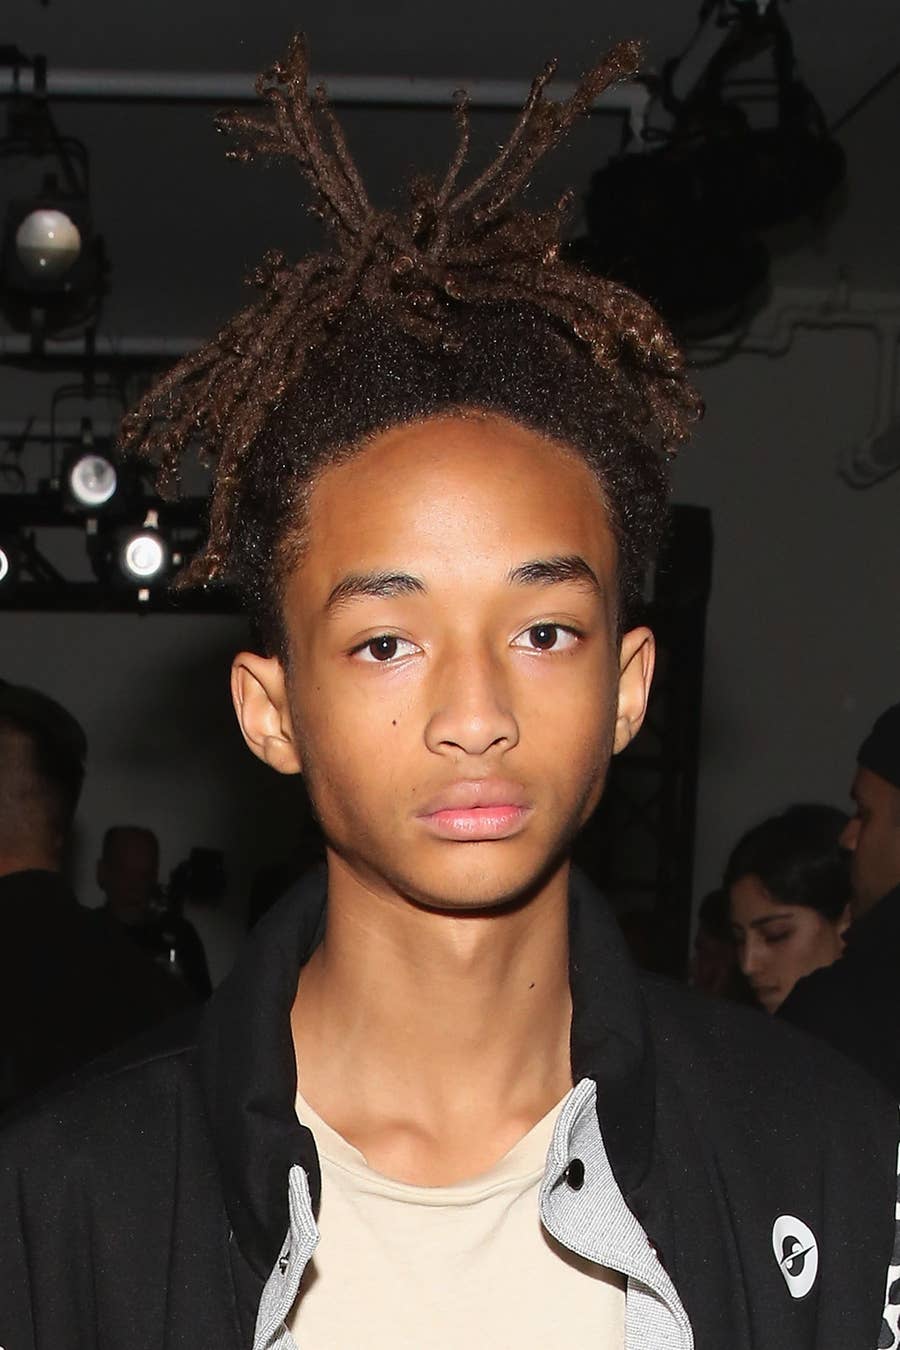 Jaden Smith Is Changing Professions: 'I Am Becoming a Full-Time Inventor